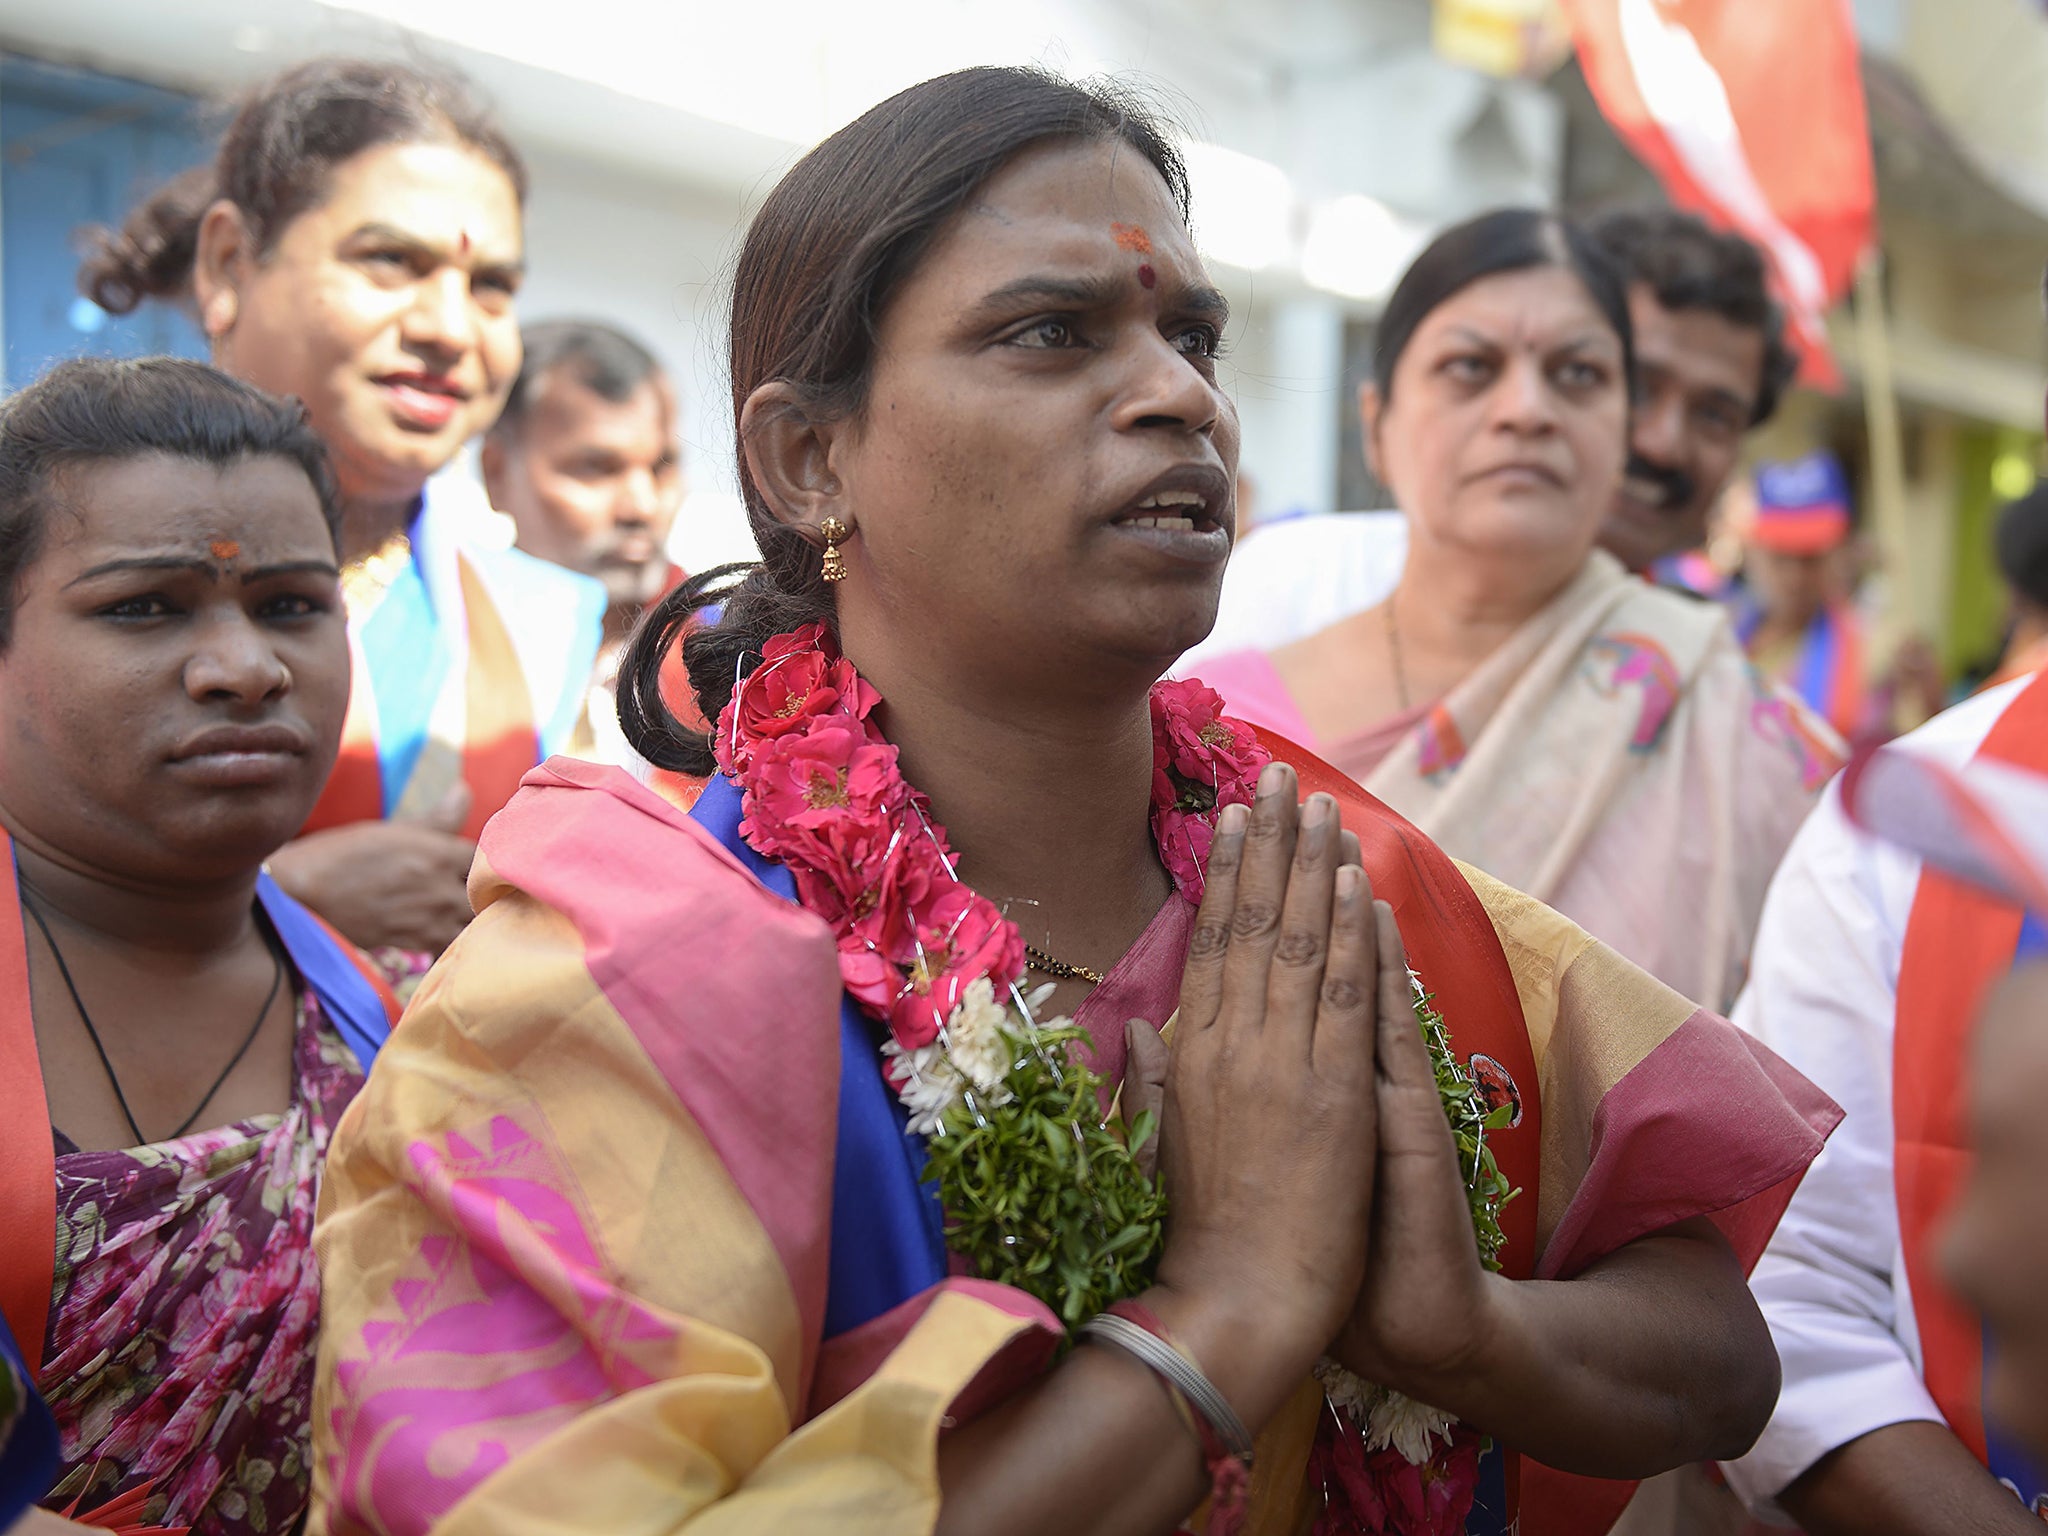 Chandramukhi Muvvala greets voters as she campaigns in the Goshamahal constituency in Hyderabad